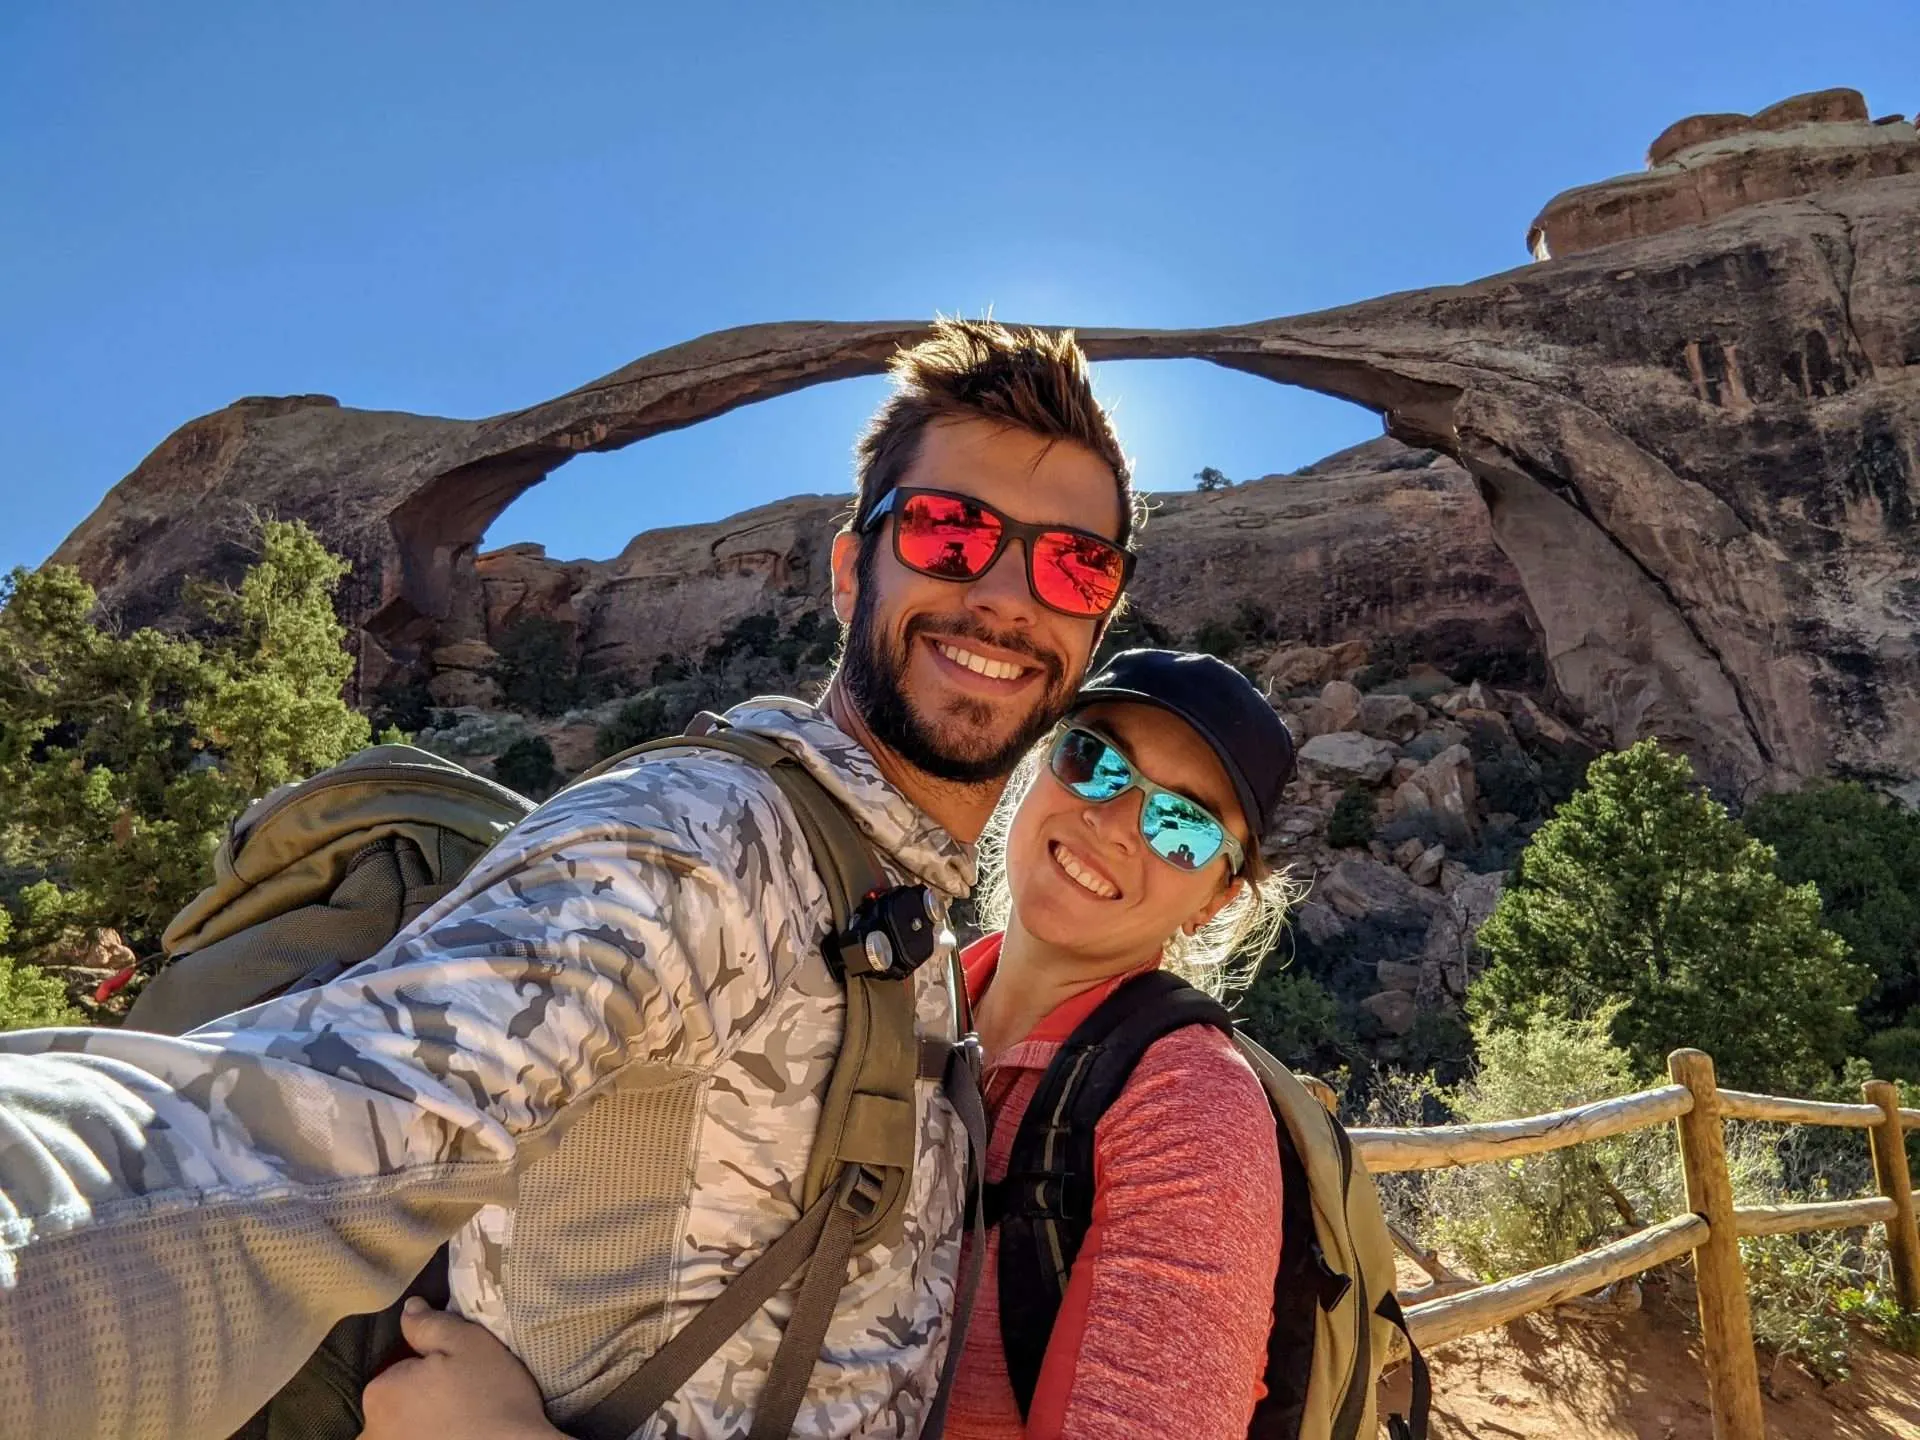 Tom and Cait from Mortons on the Move traveling in Arches National Park together.